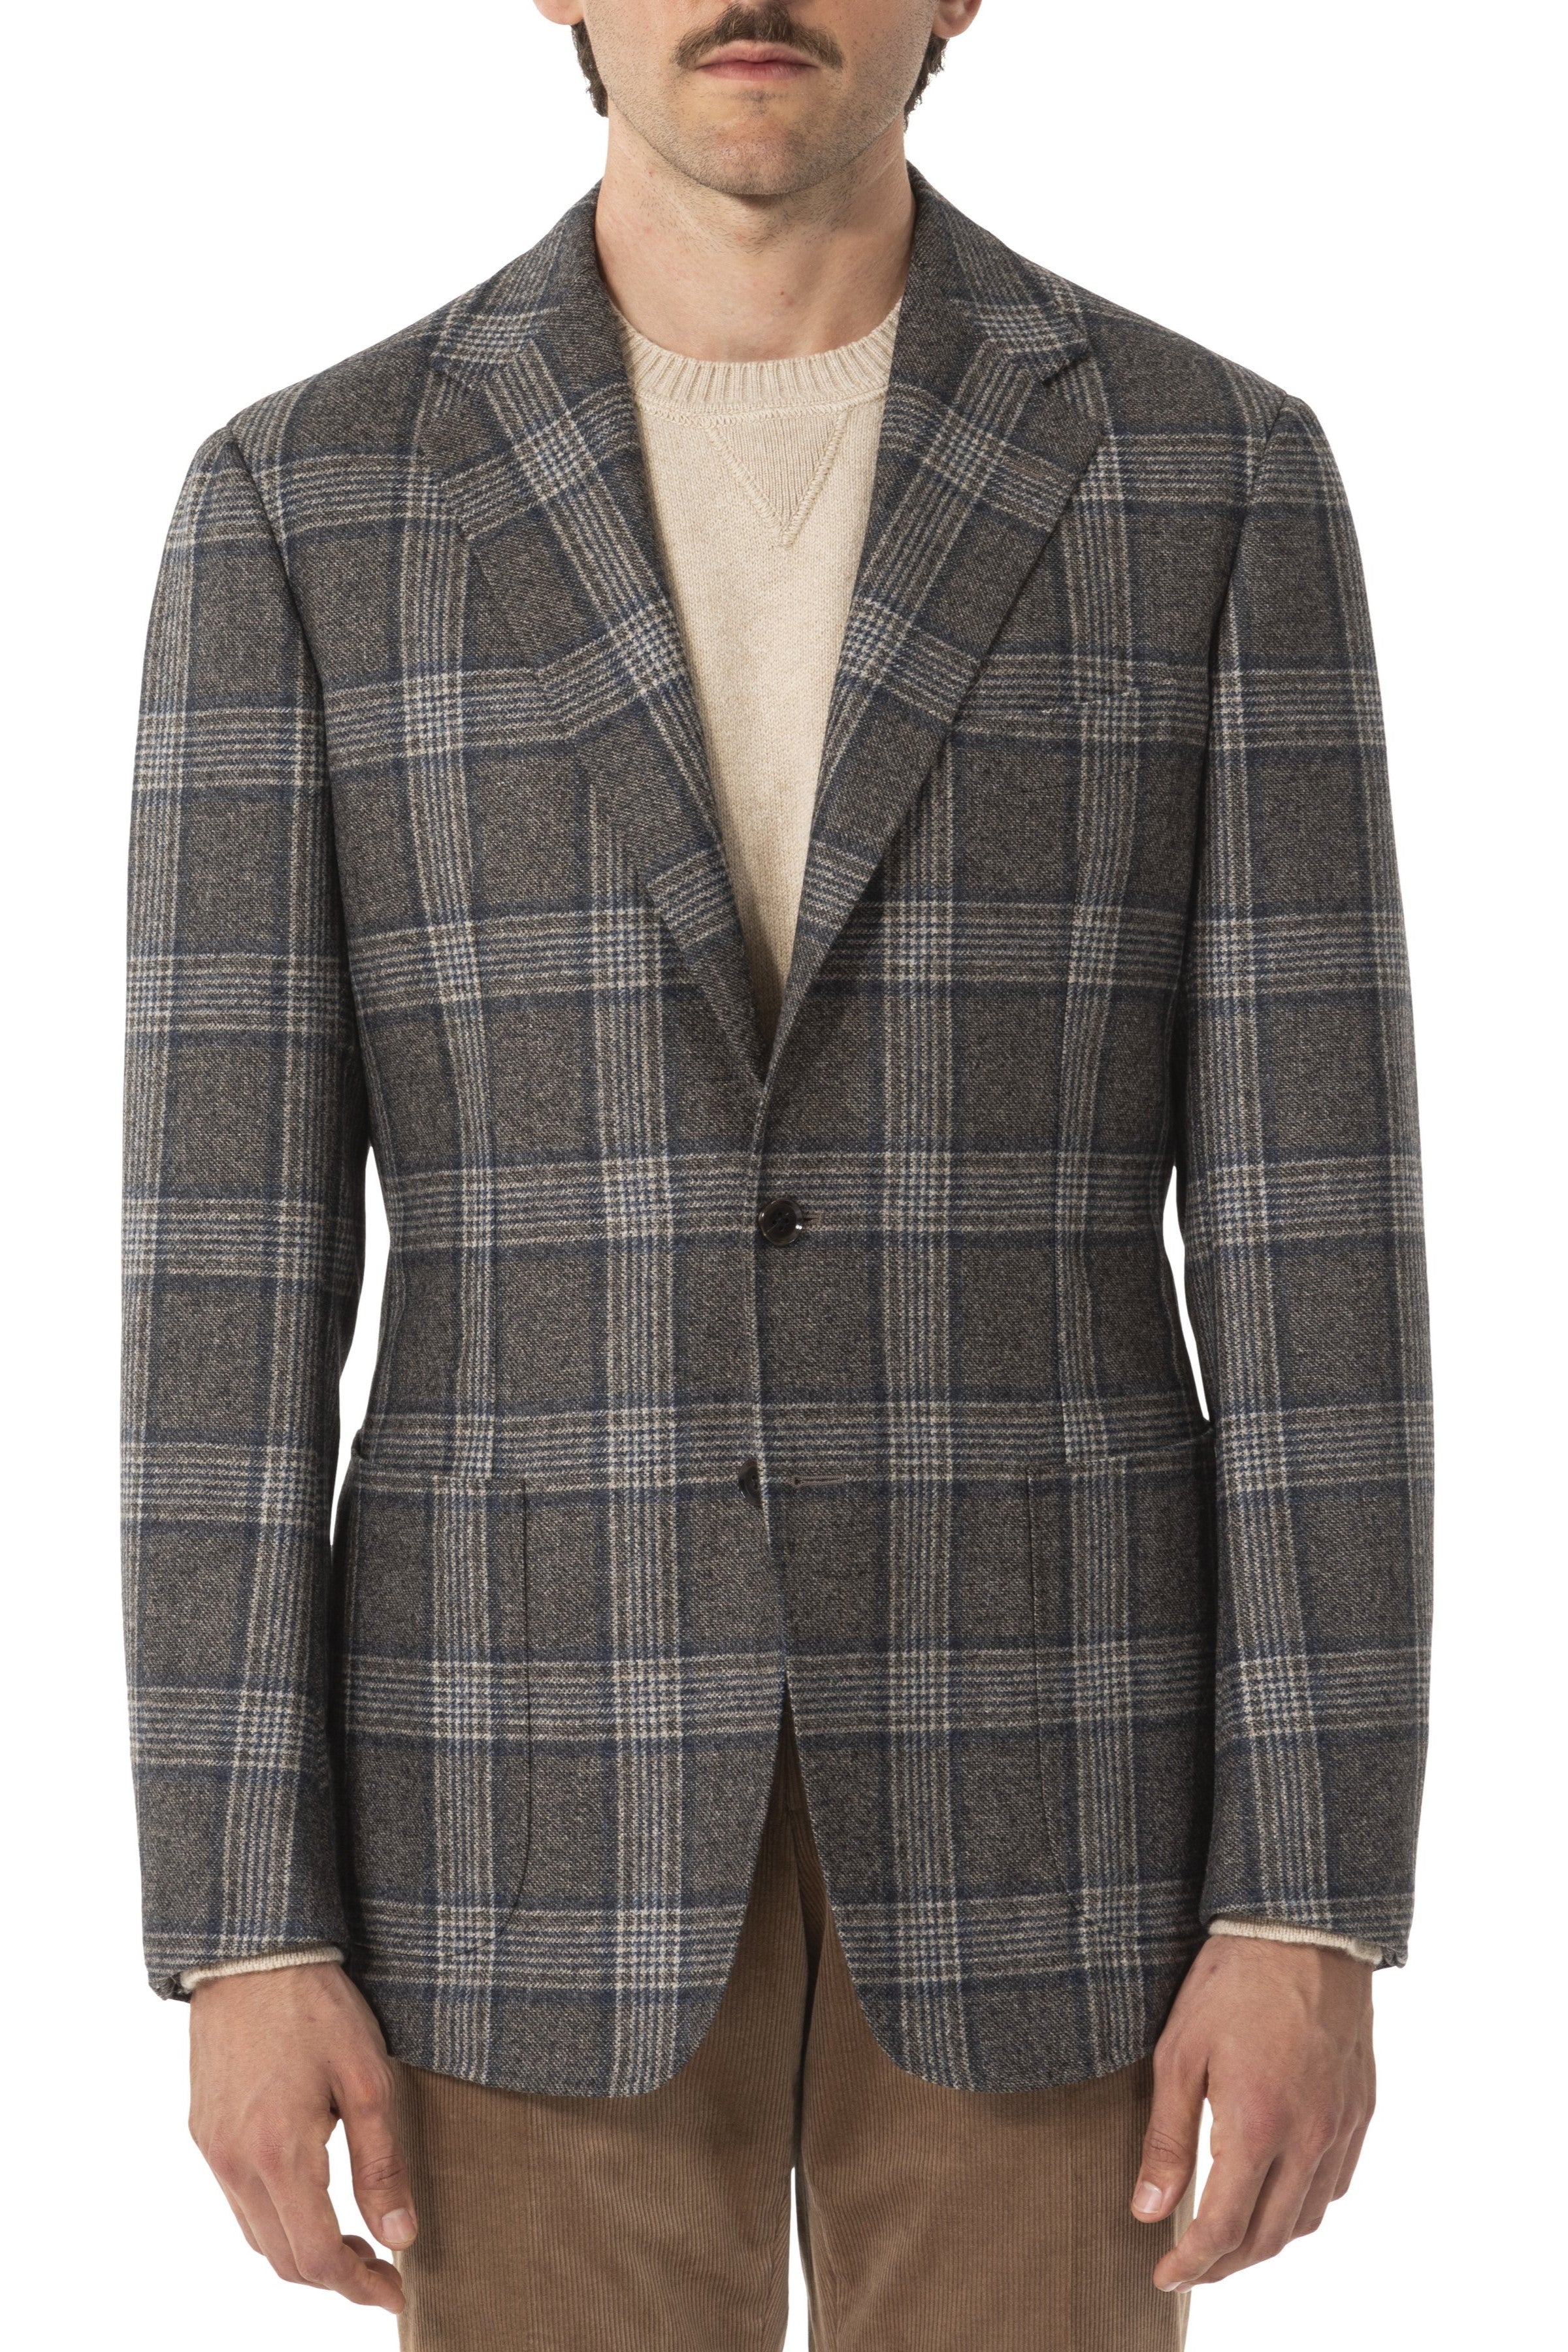 The Armoury by Ring Jacket Model 3 Grey-Blue Prince of Wales Check Wool Sport Coat